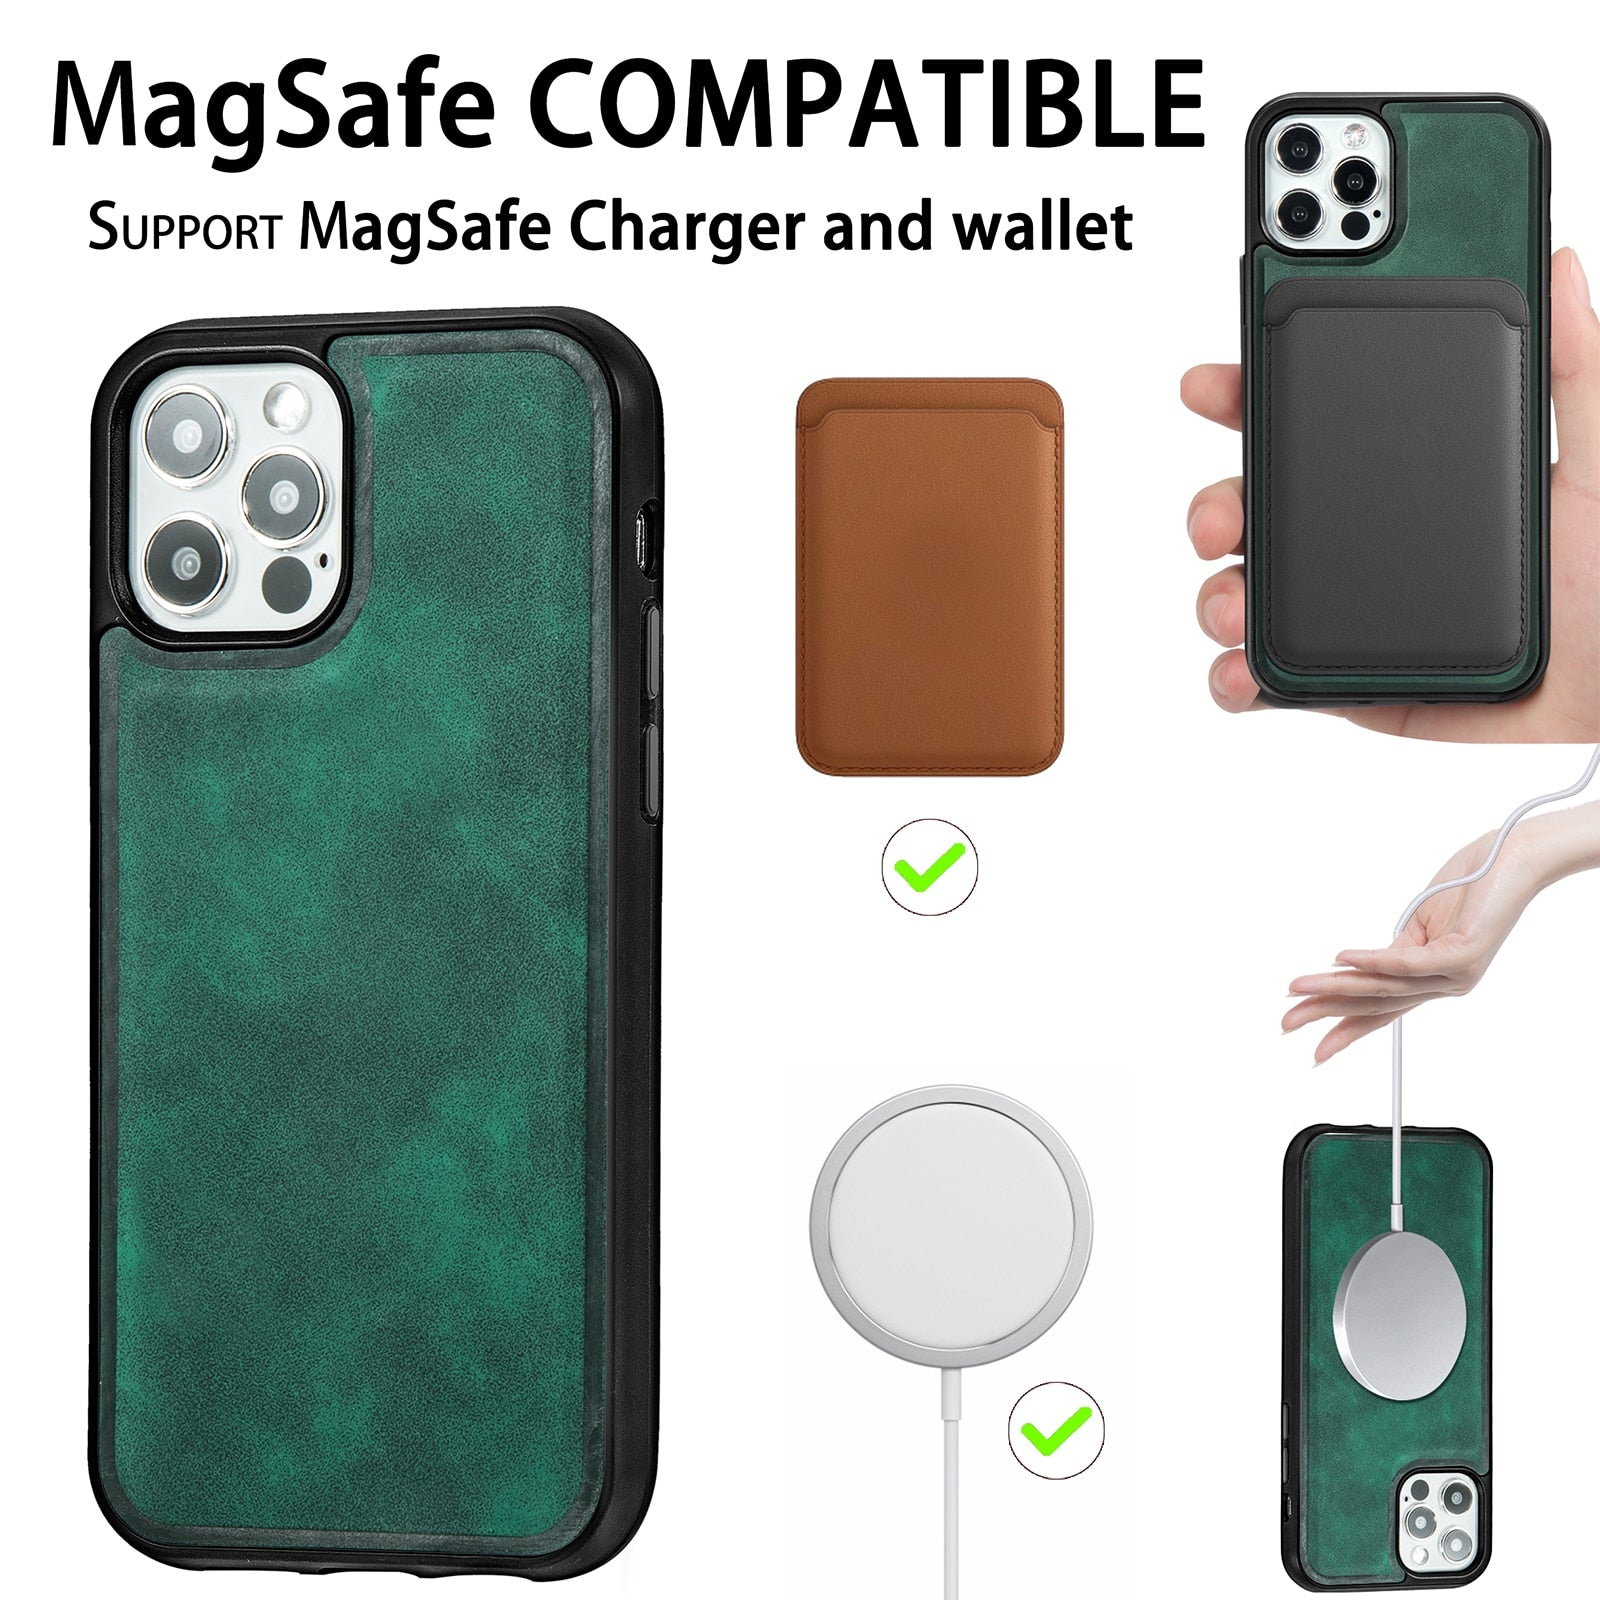 Smooth Leather Case for iPhone 12 Pro Max/iPhone 12 mini Cover, Vintage leather Fitted PC Protection Cover Wireless charging - 380230 Find Epic Store